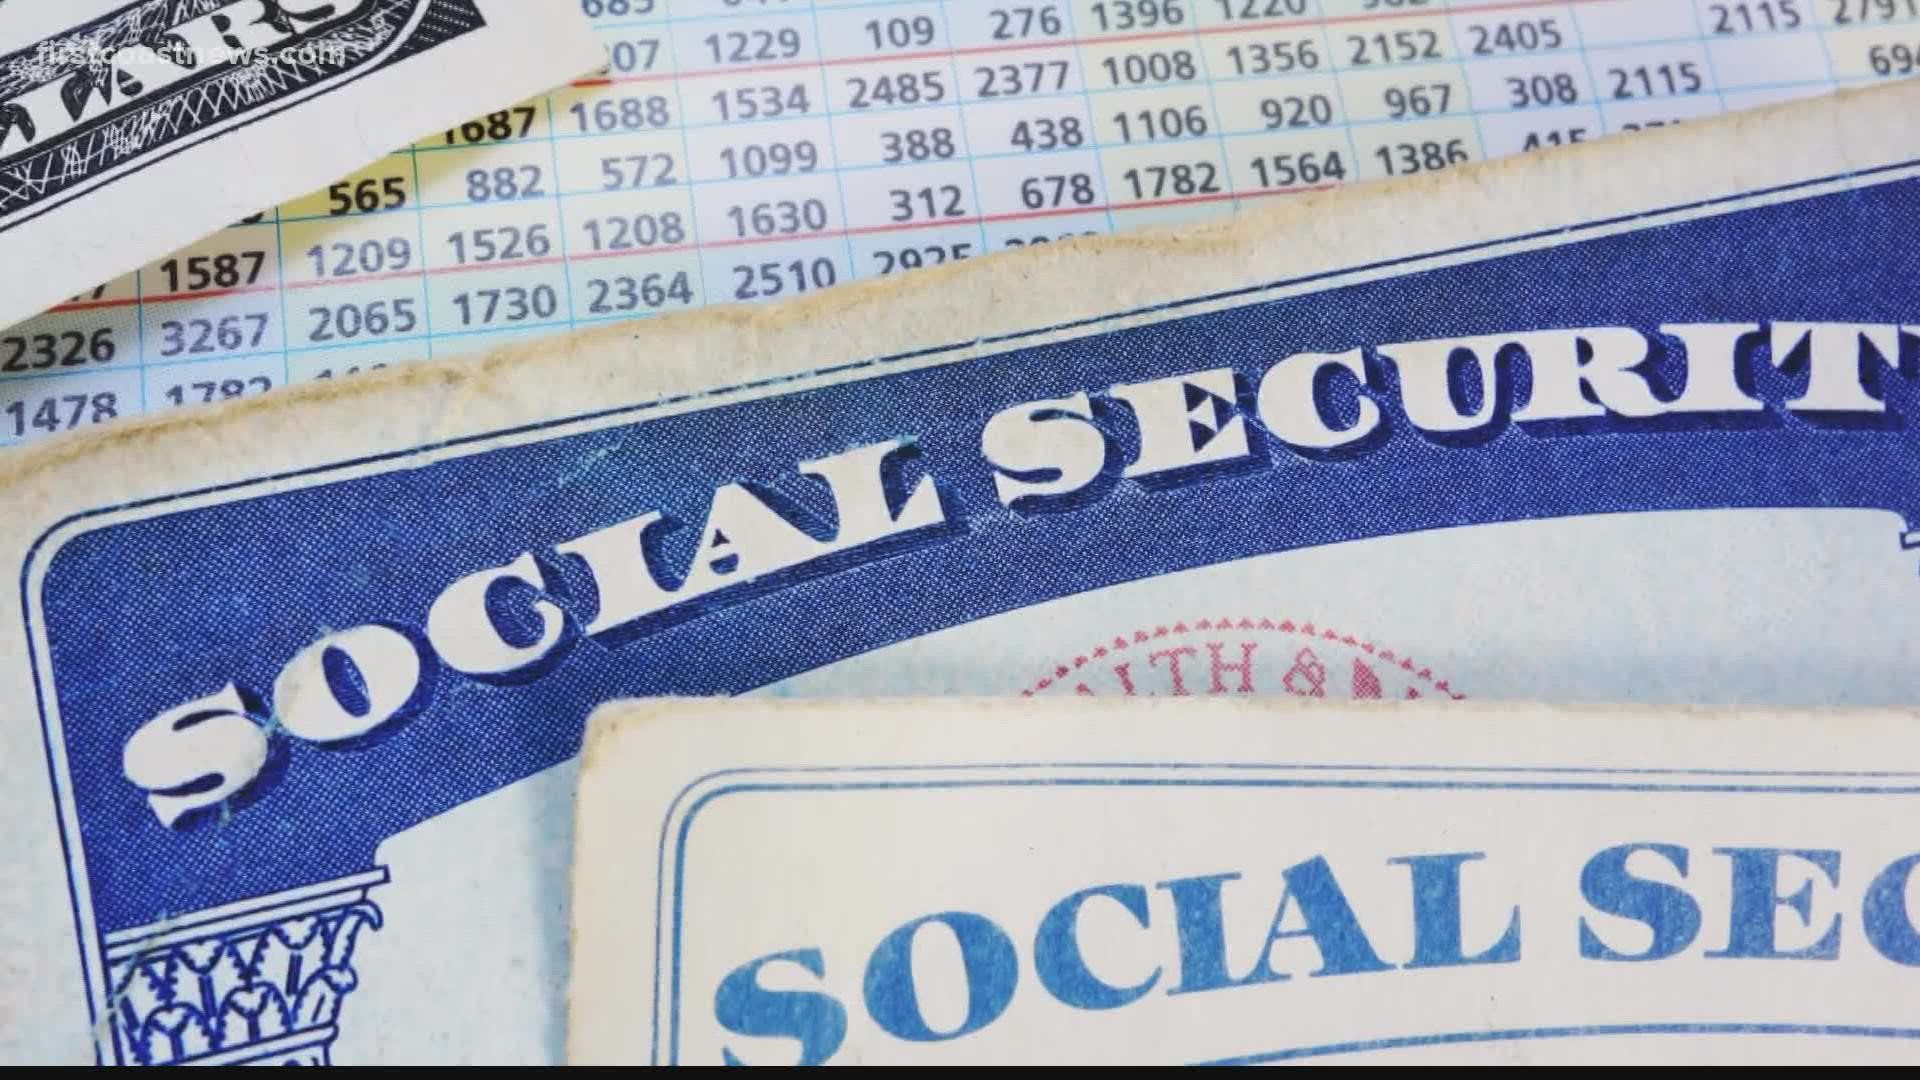 A Jacksonville woman says the amount of money residents receive from social security should go up to match inflation.